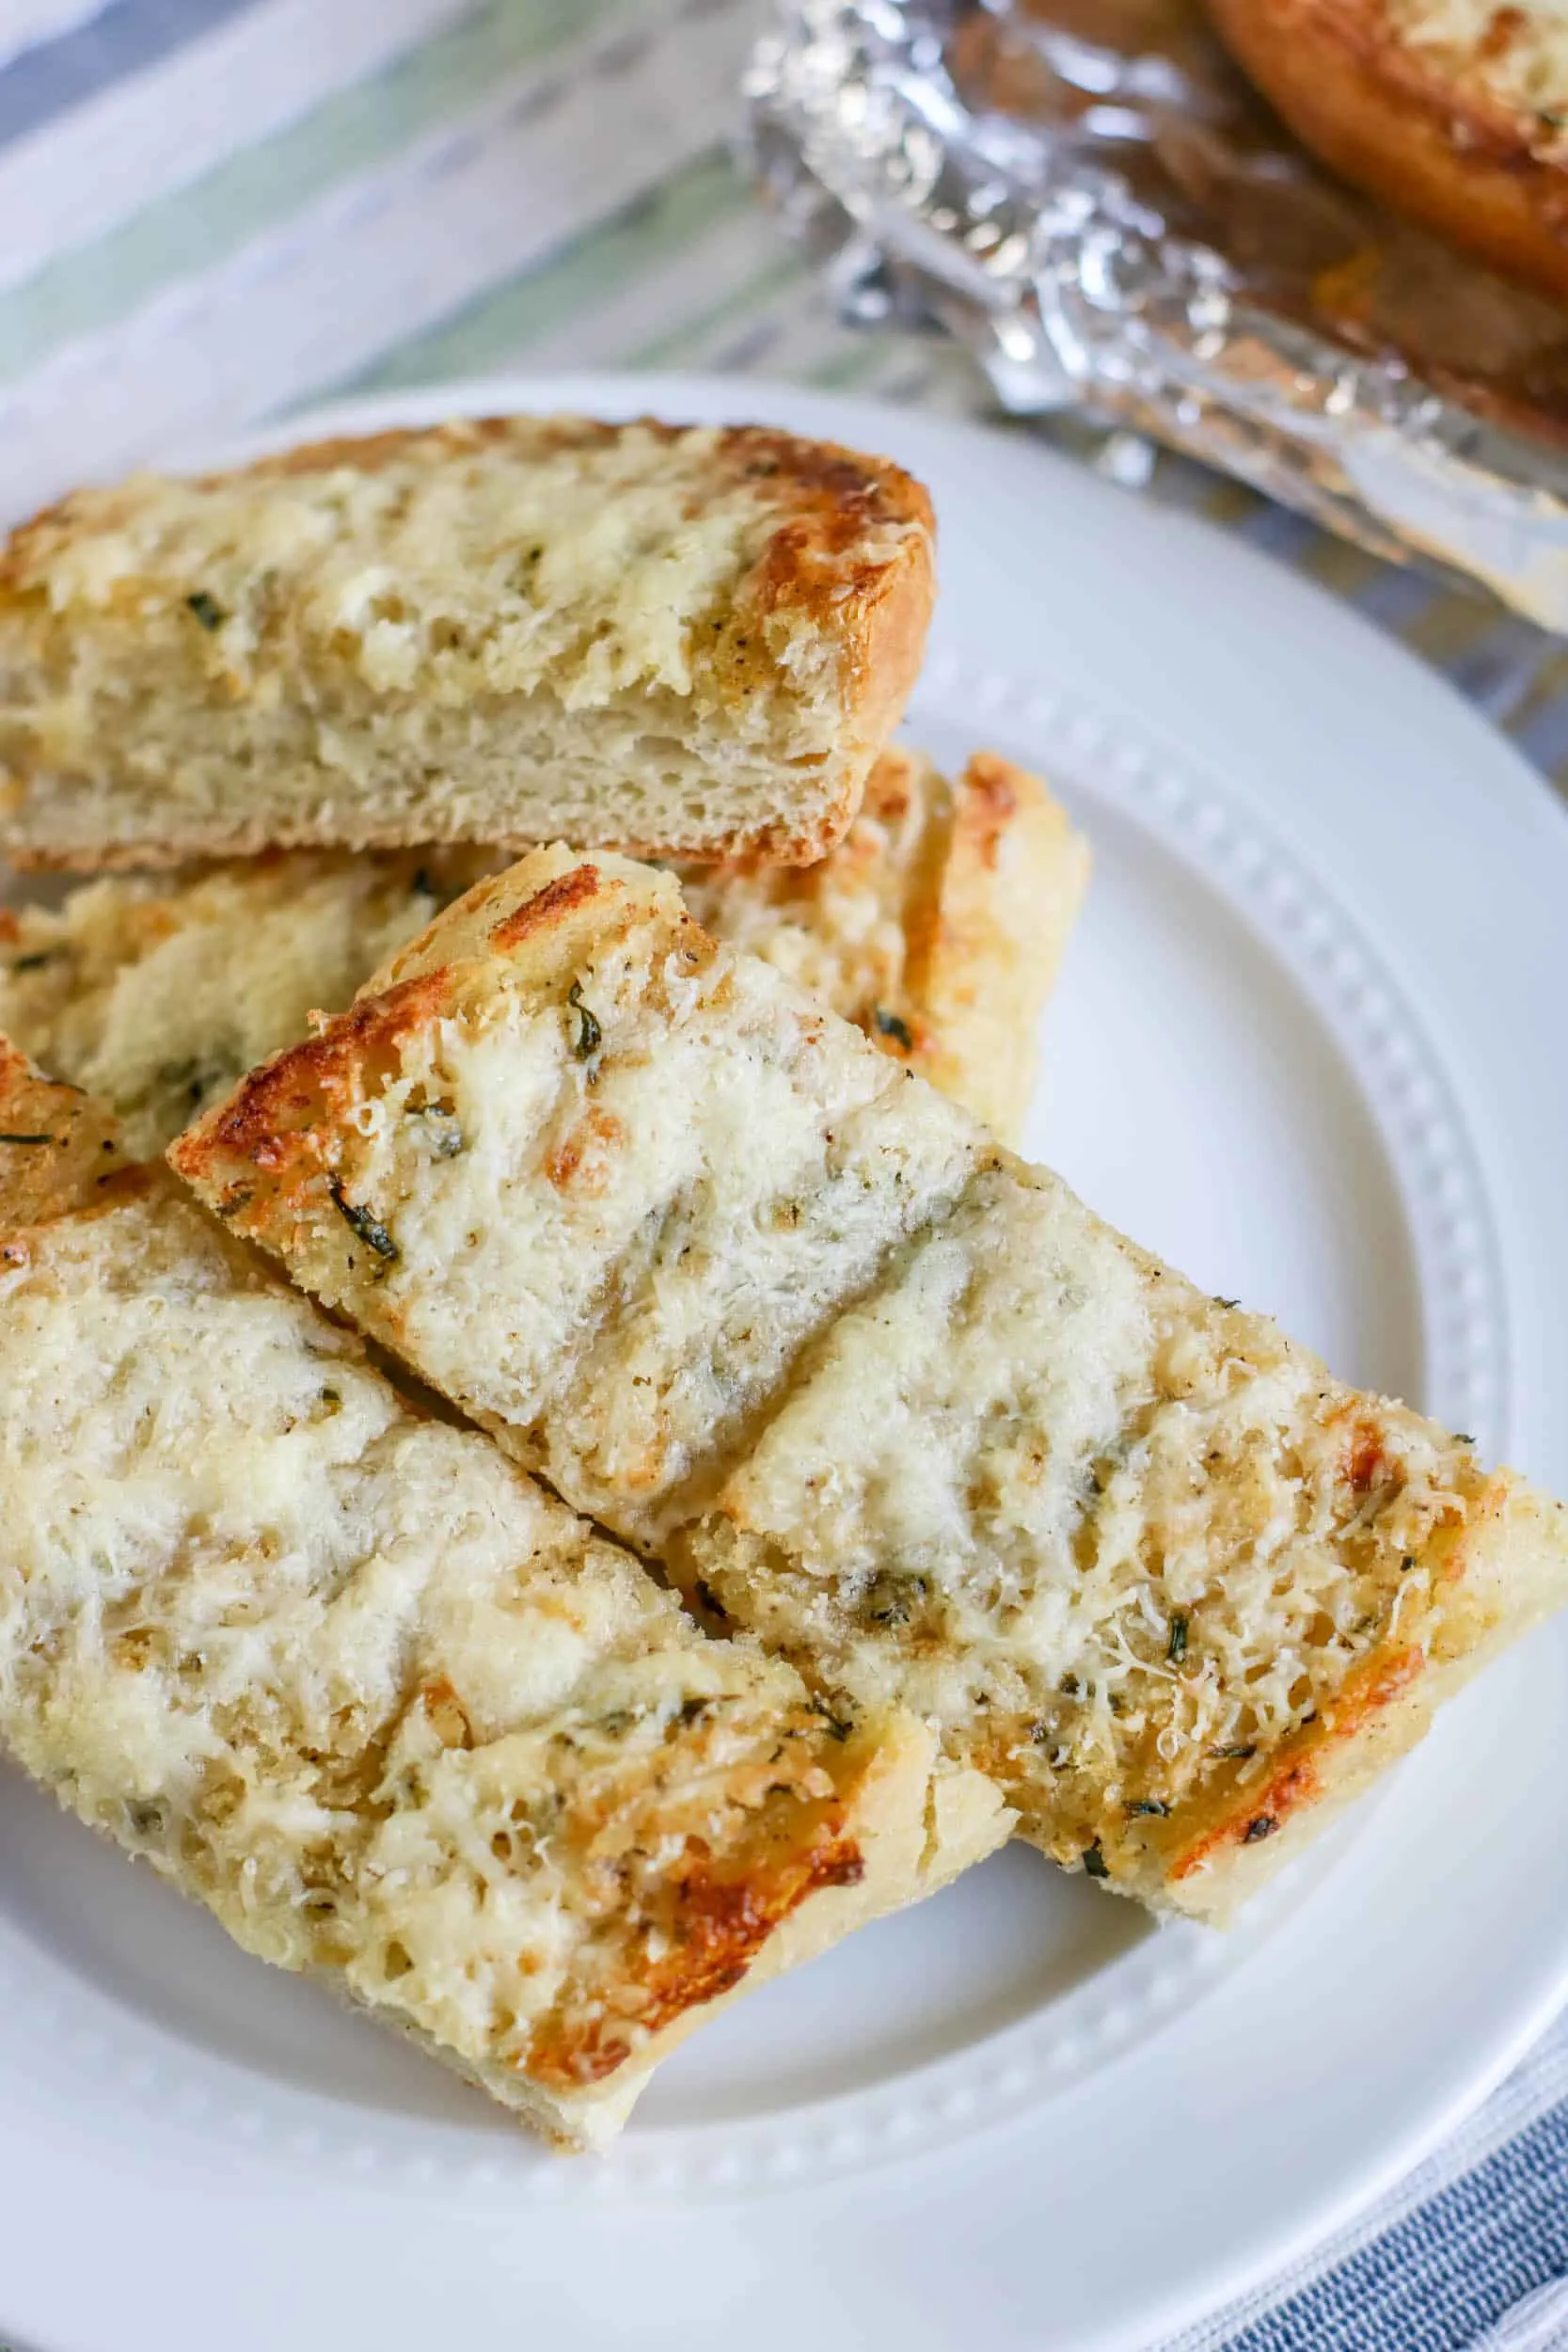 Slathered with a homemade herbed garlic butter spread and garnished with two kinds of cheese, French bread gets toasted to savory perfection with this irresistible cheesy garlic bread recipe. via @Mooreorlesscook